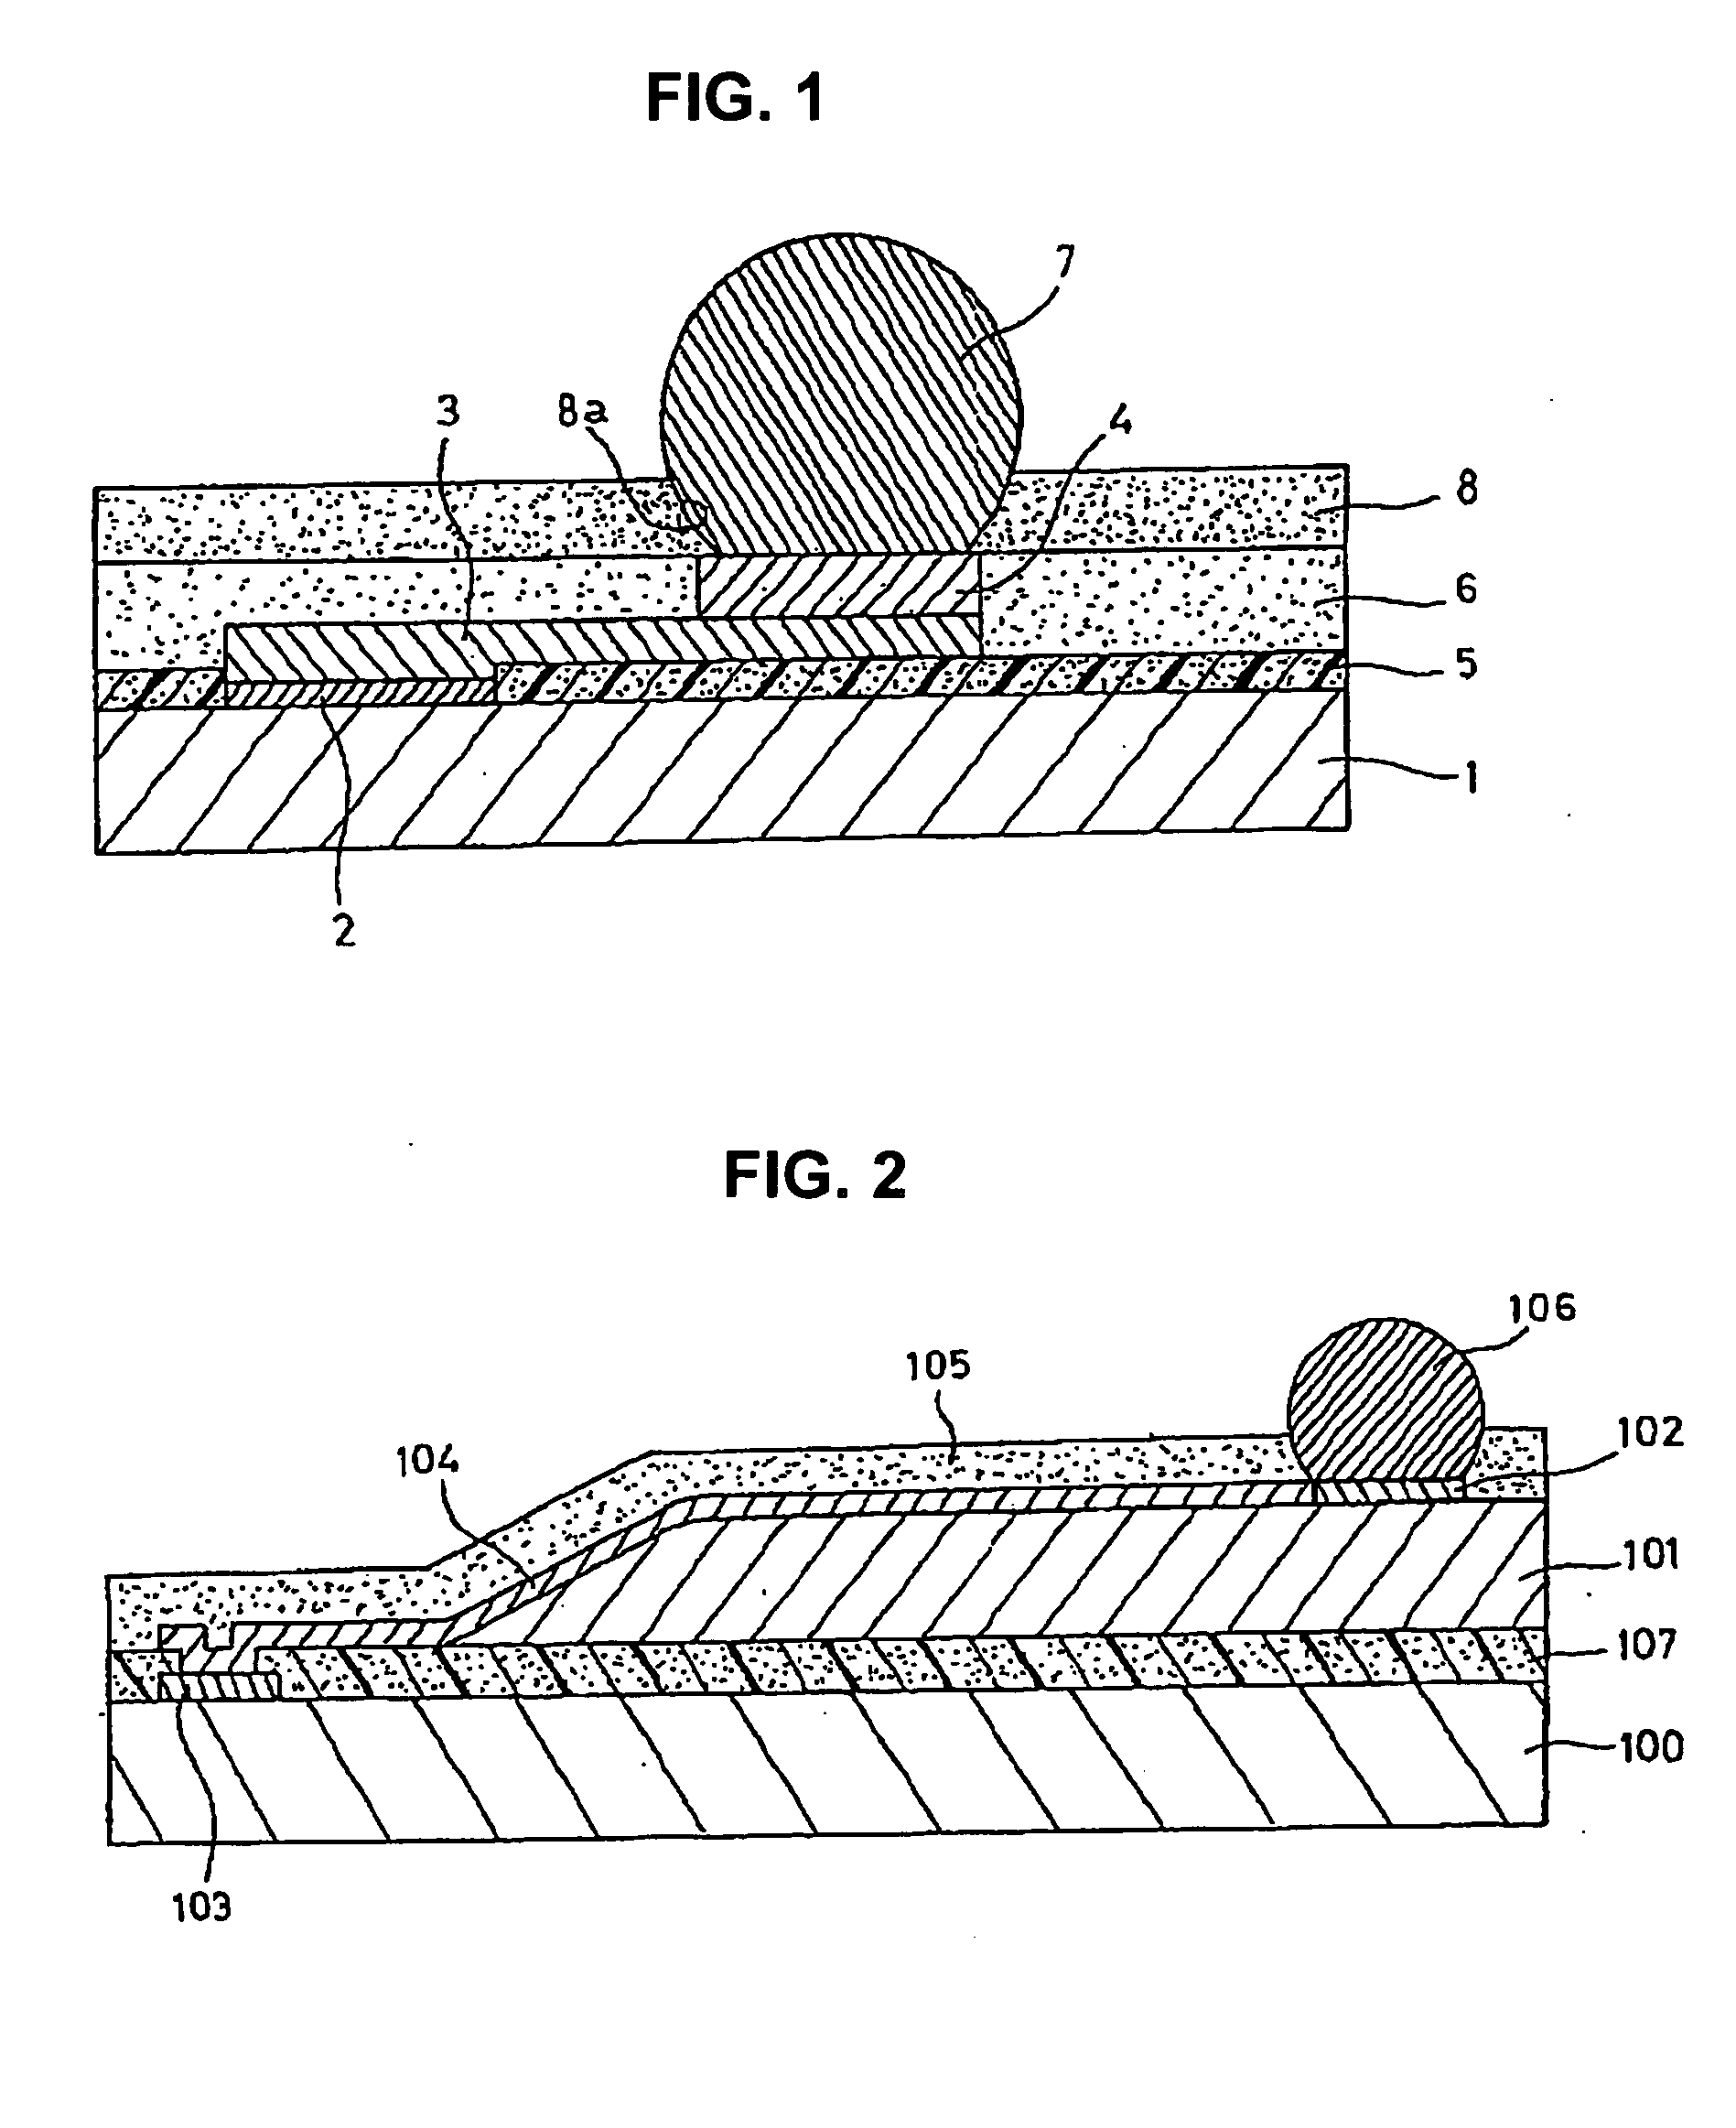 Method of manufacturing wafer level chip size package